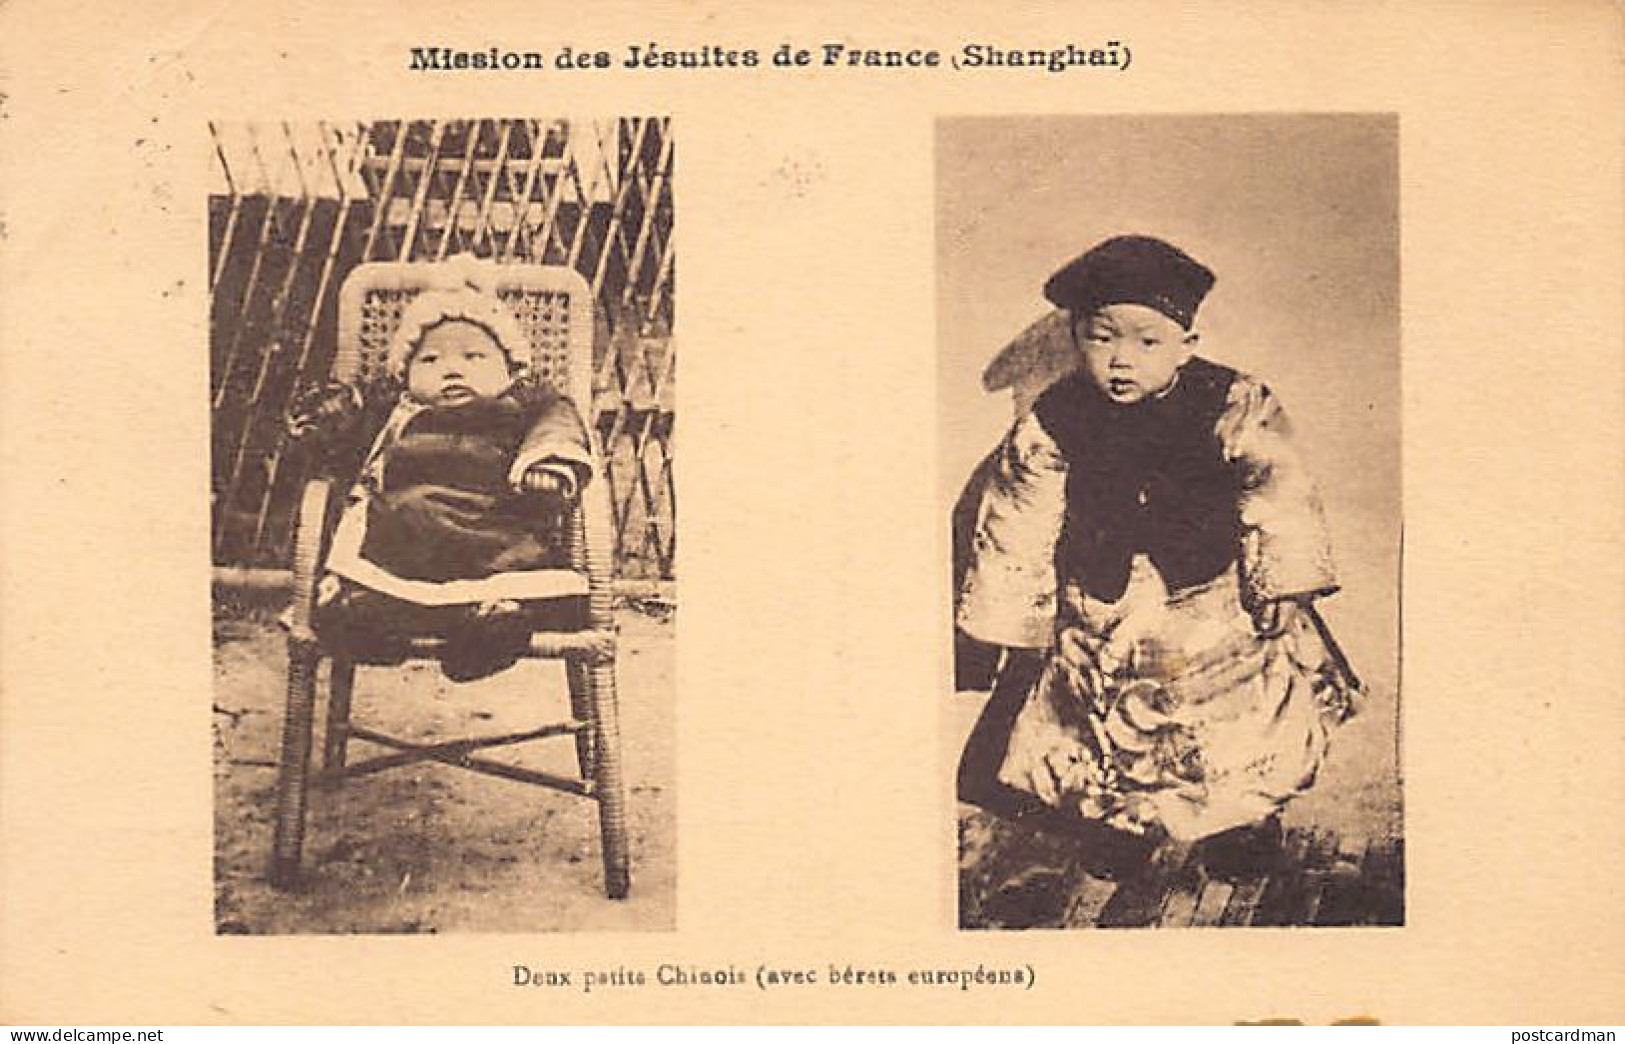 China - SHANGHAI - Two Chinese Orphans Wearing French Berets - Publ. Mission Of The French Jesuits  - China